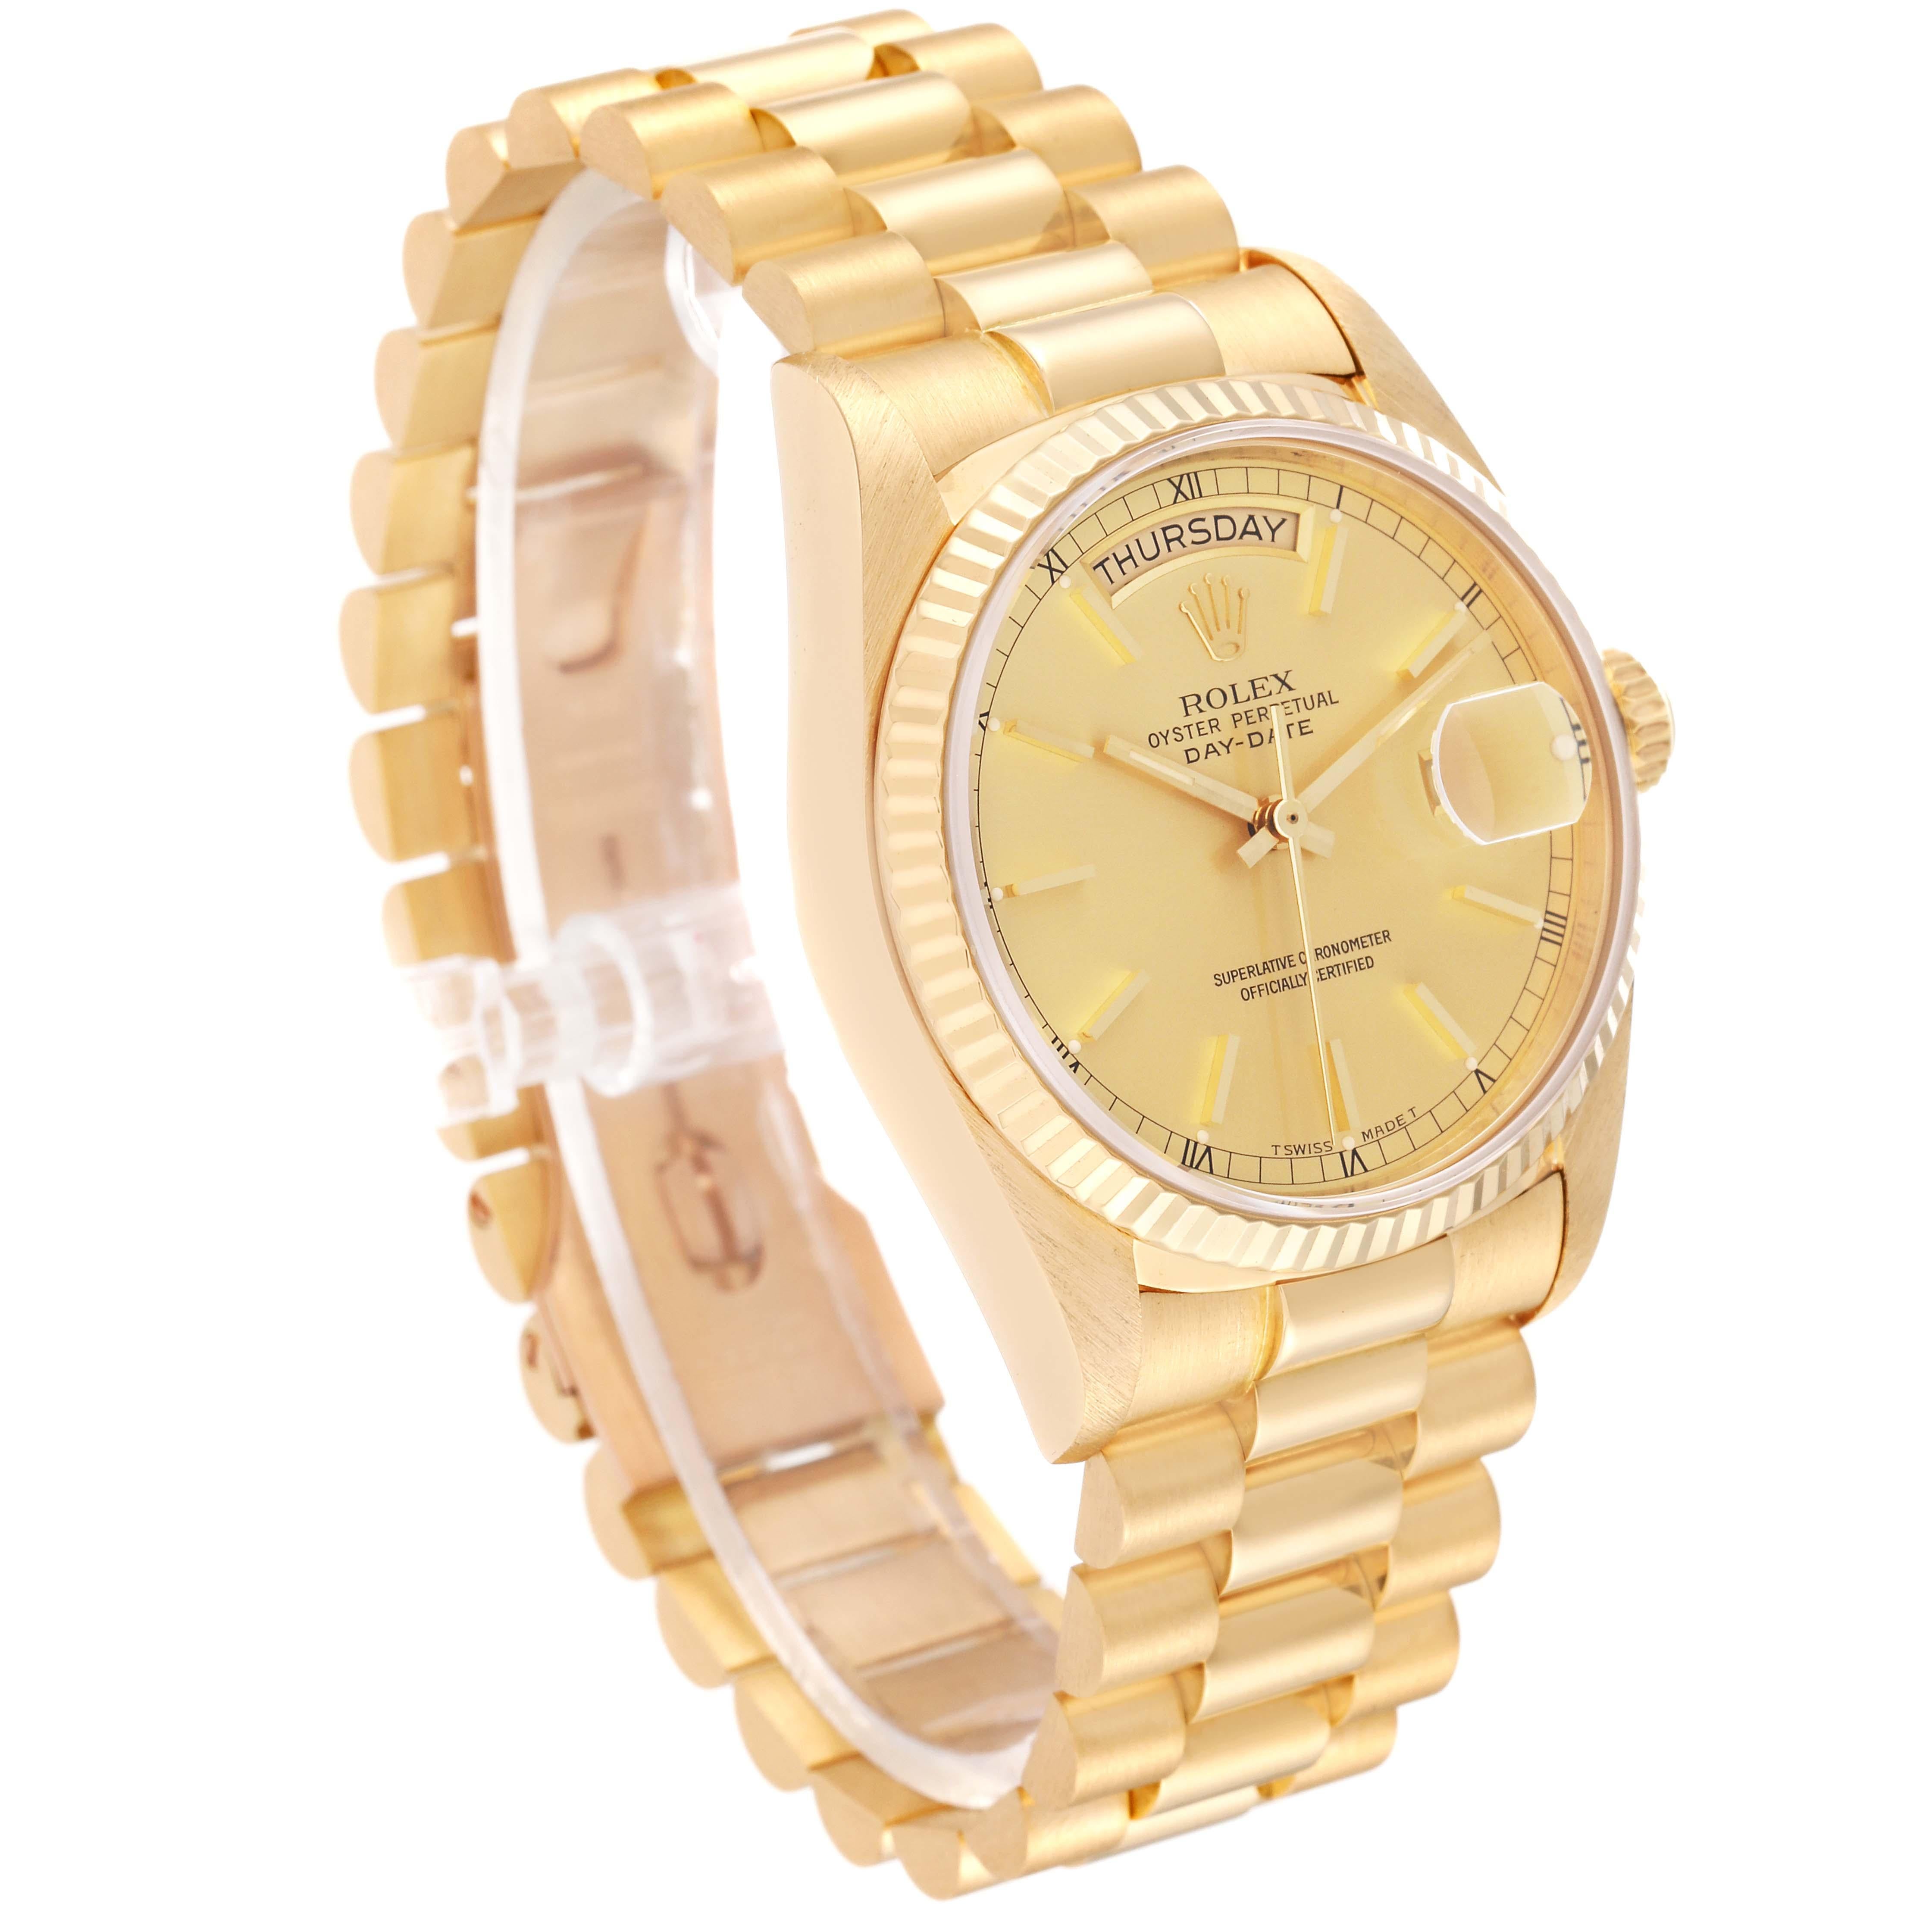 Rolex President Day-Date Yellow Gold Champagne Dial Mens Watch 18038 In Excellent Condition For Sale In Atlanta, GA